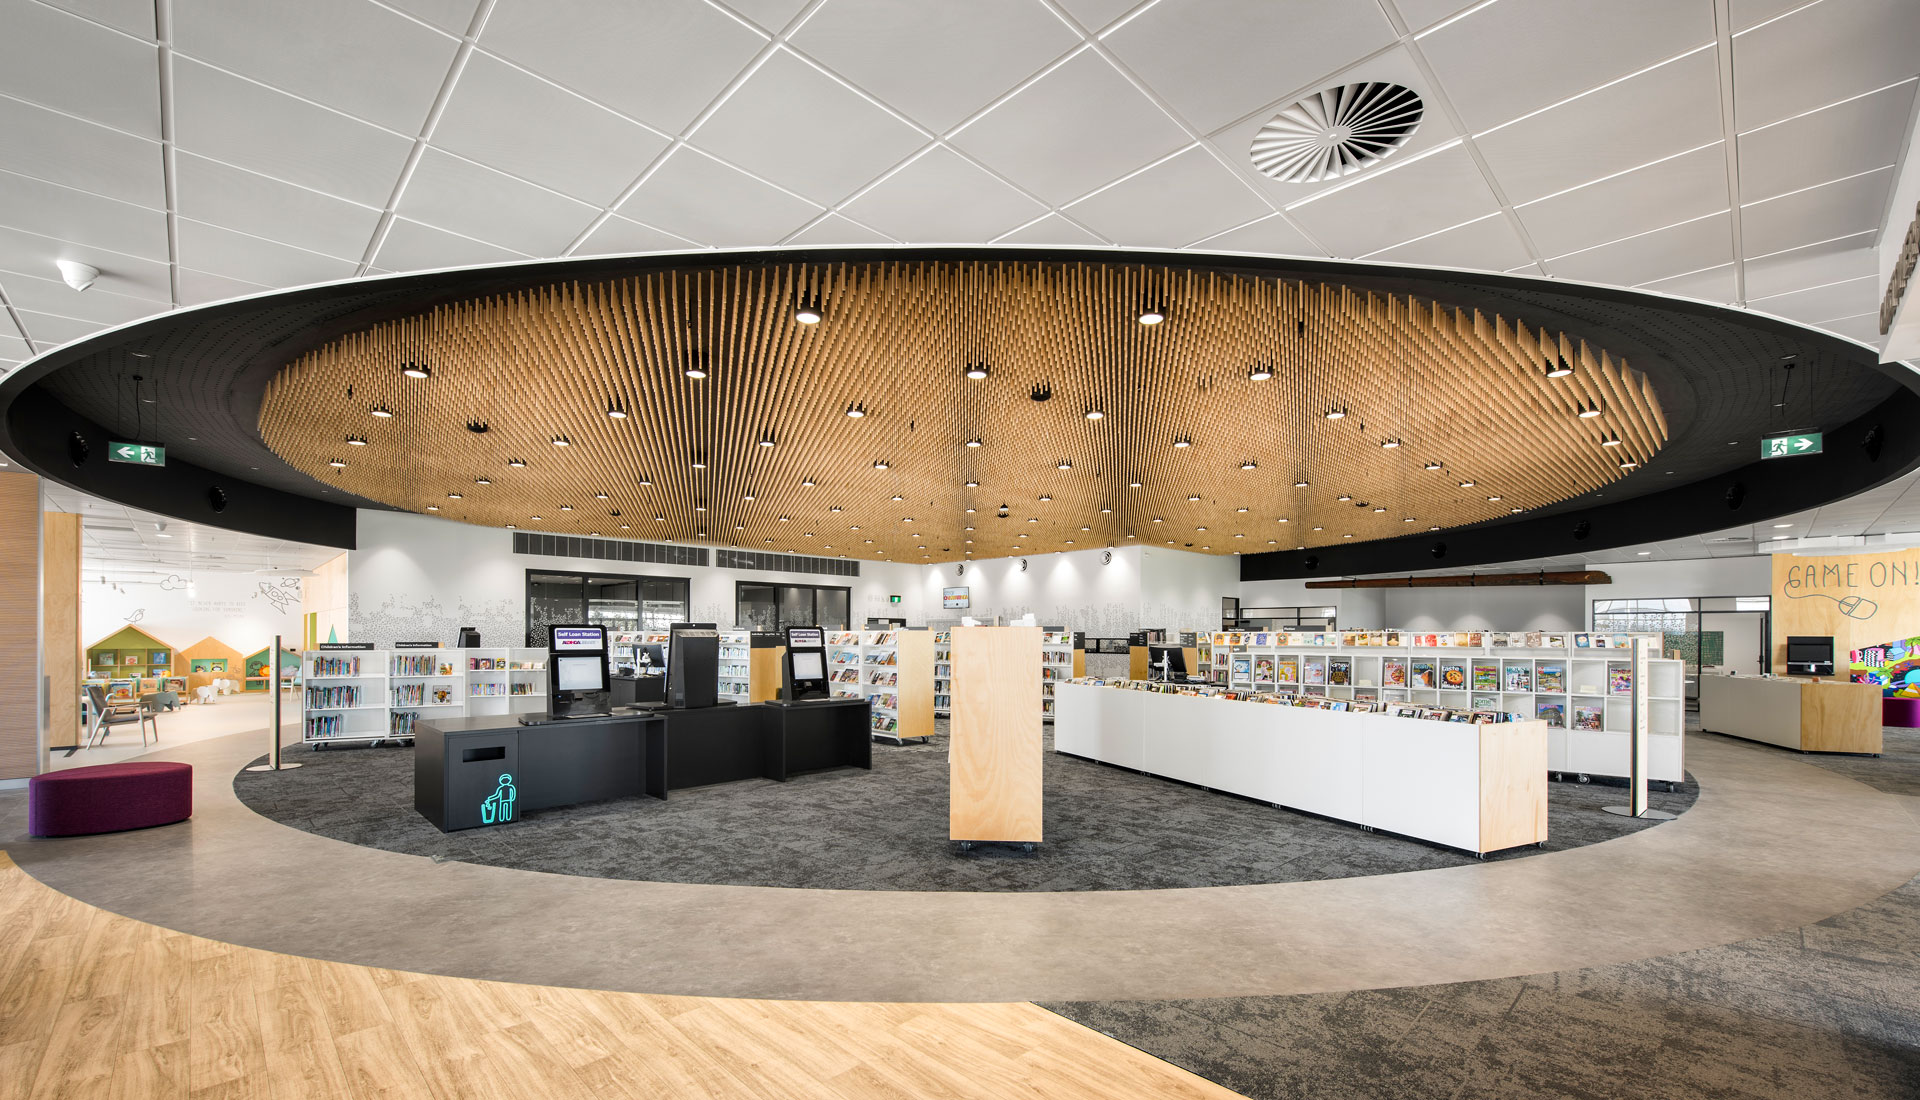 Acoustic mdf ceiling and wall panels designed by keystonelinings